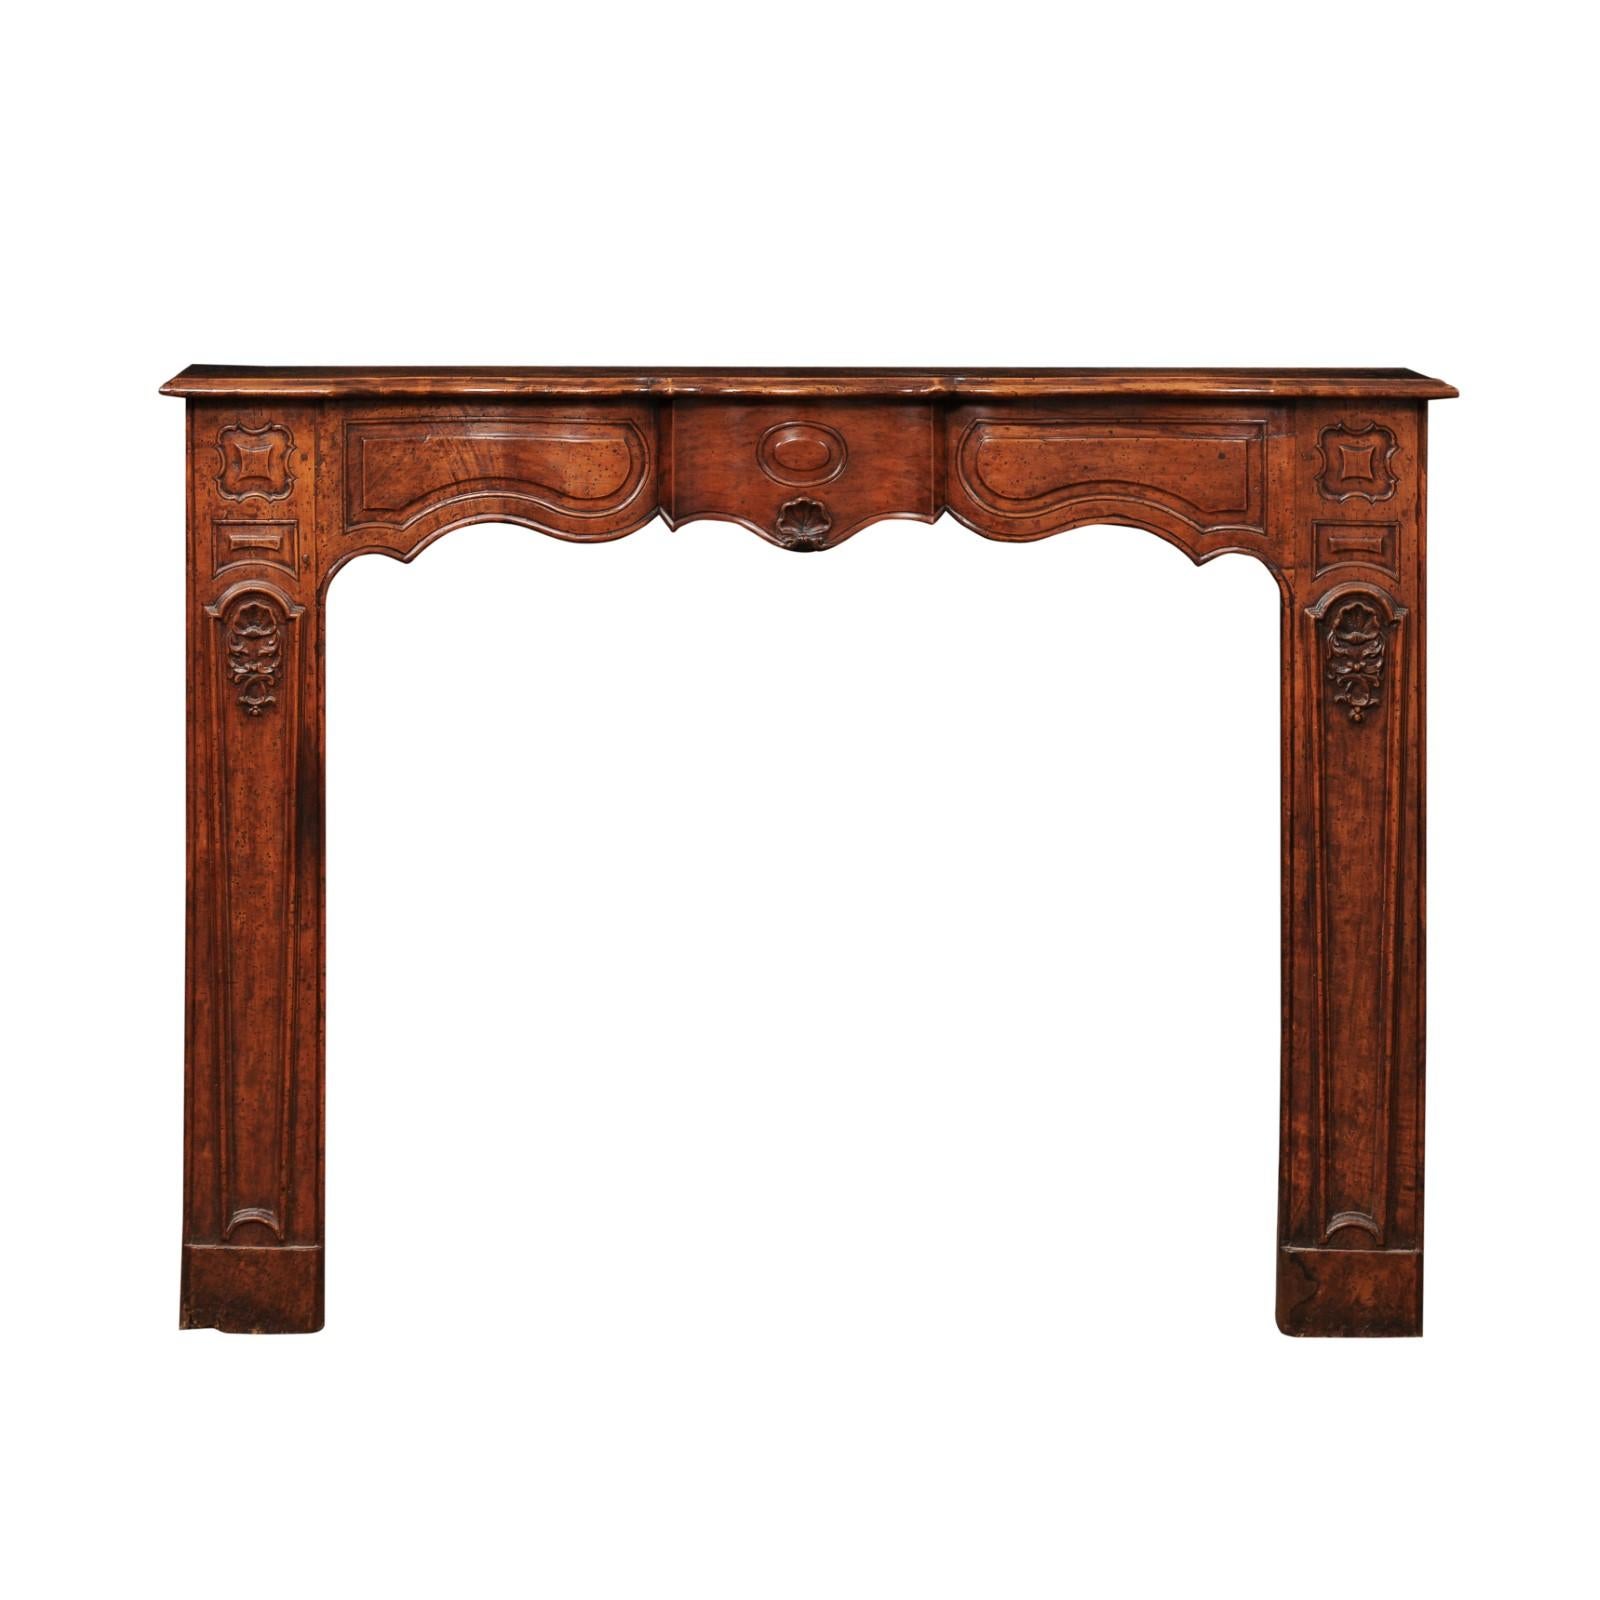 Regency 18th Century French Regence Style Walnut Mantle with Shell Carving For Sale